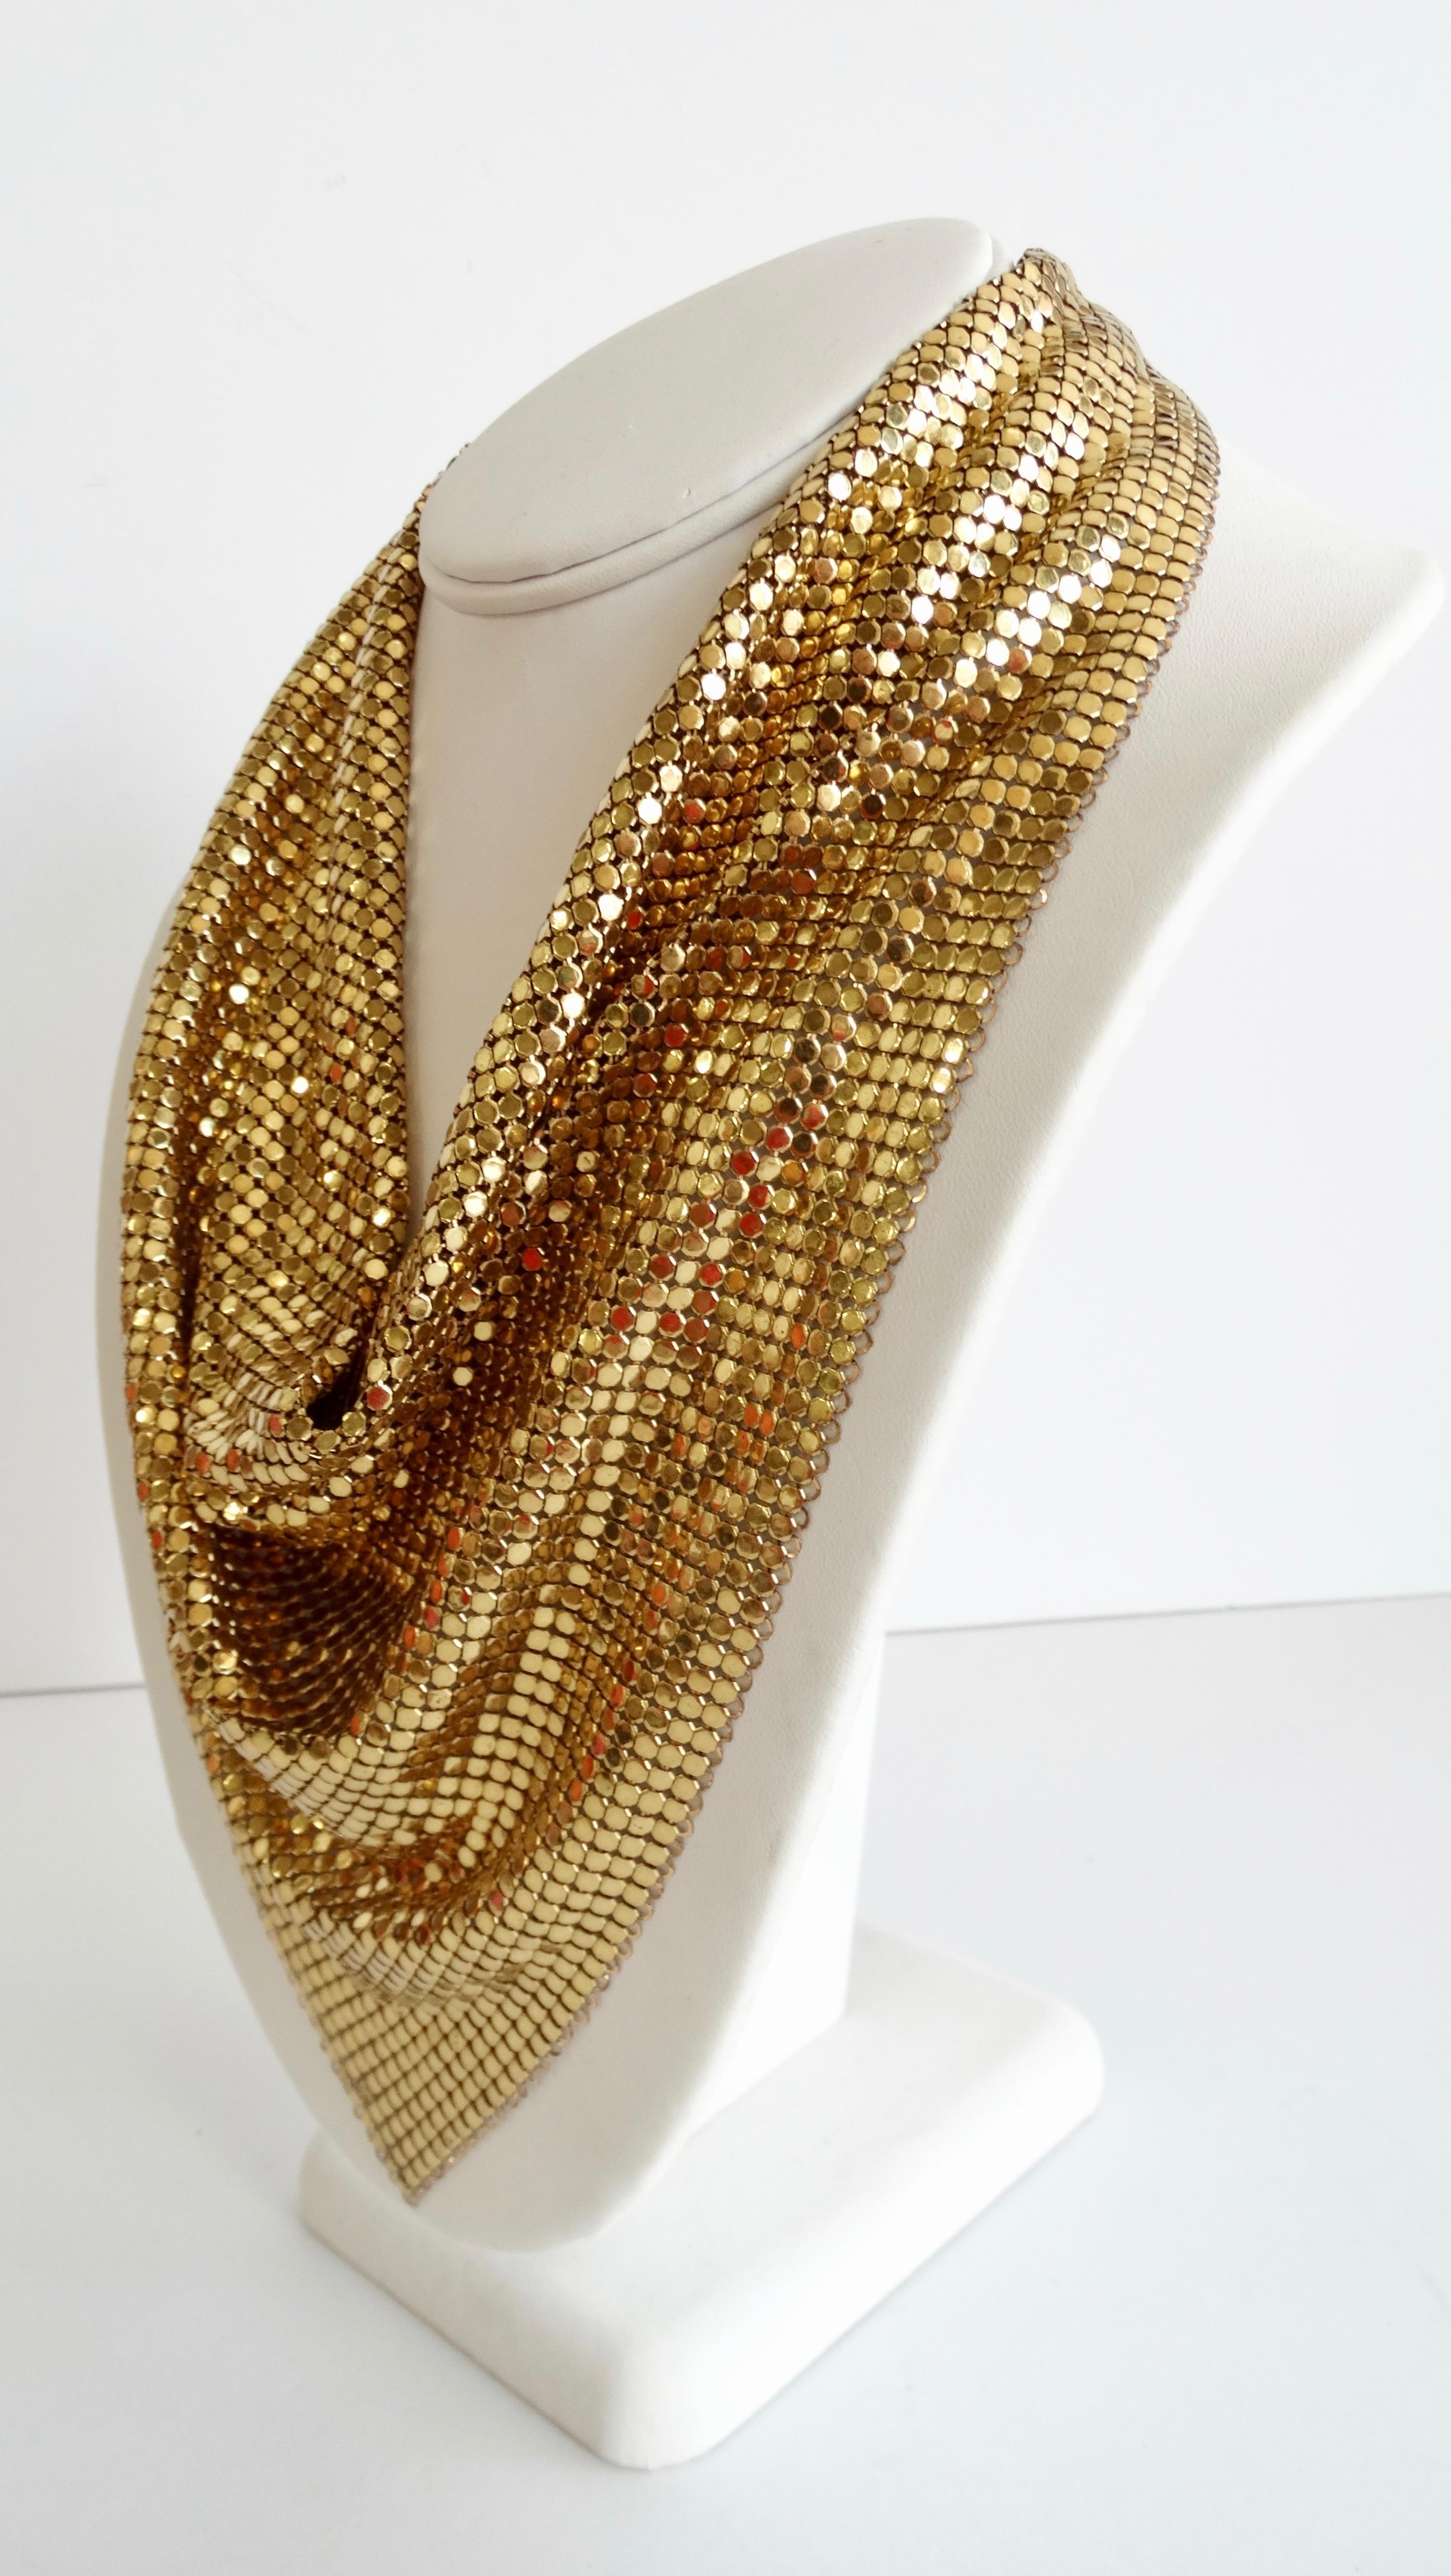 Elevate your holiday looks in our incredible 1970s Whiting & Davis scarf necklace! Made of super fine draped gold metal mesh, gathers elegantly around the neck. Hook and eye clasp for an adjustable fit. Signed Whiting & Davis on the charm at the end